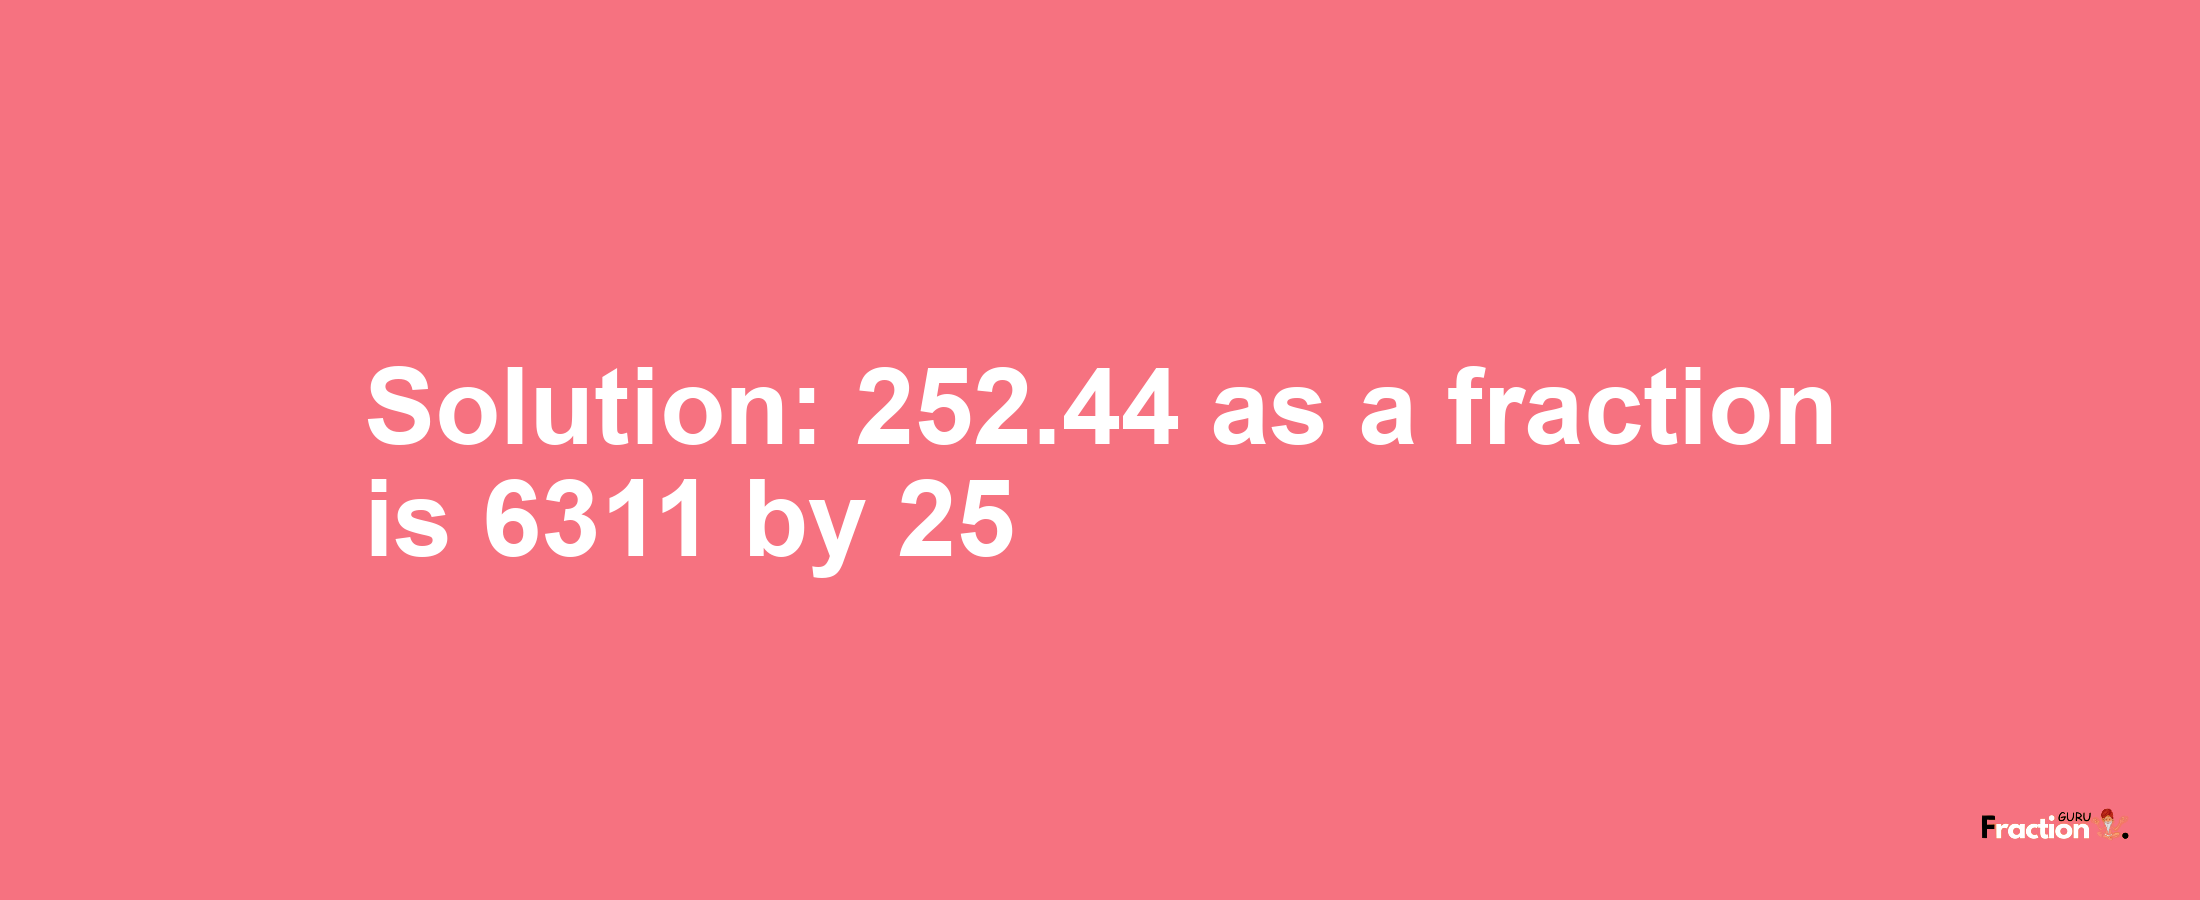 Solution:252.44 as a fraction is 6311/25